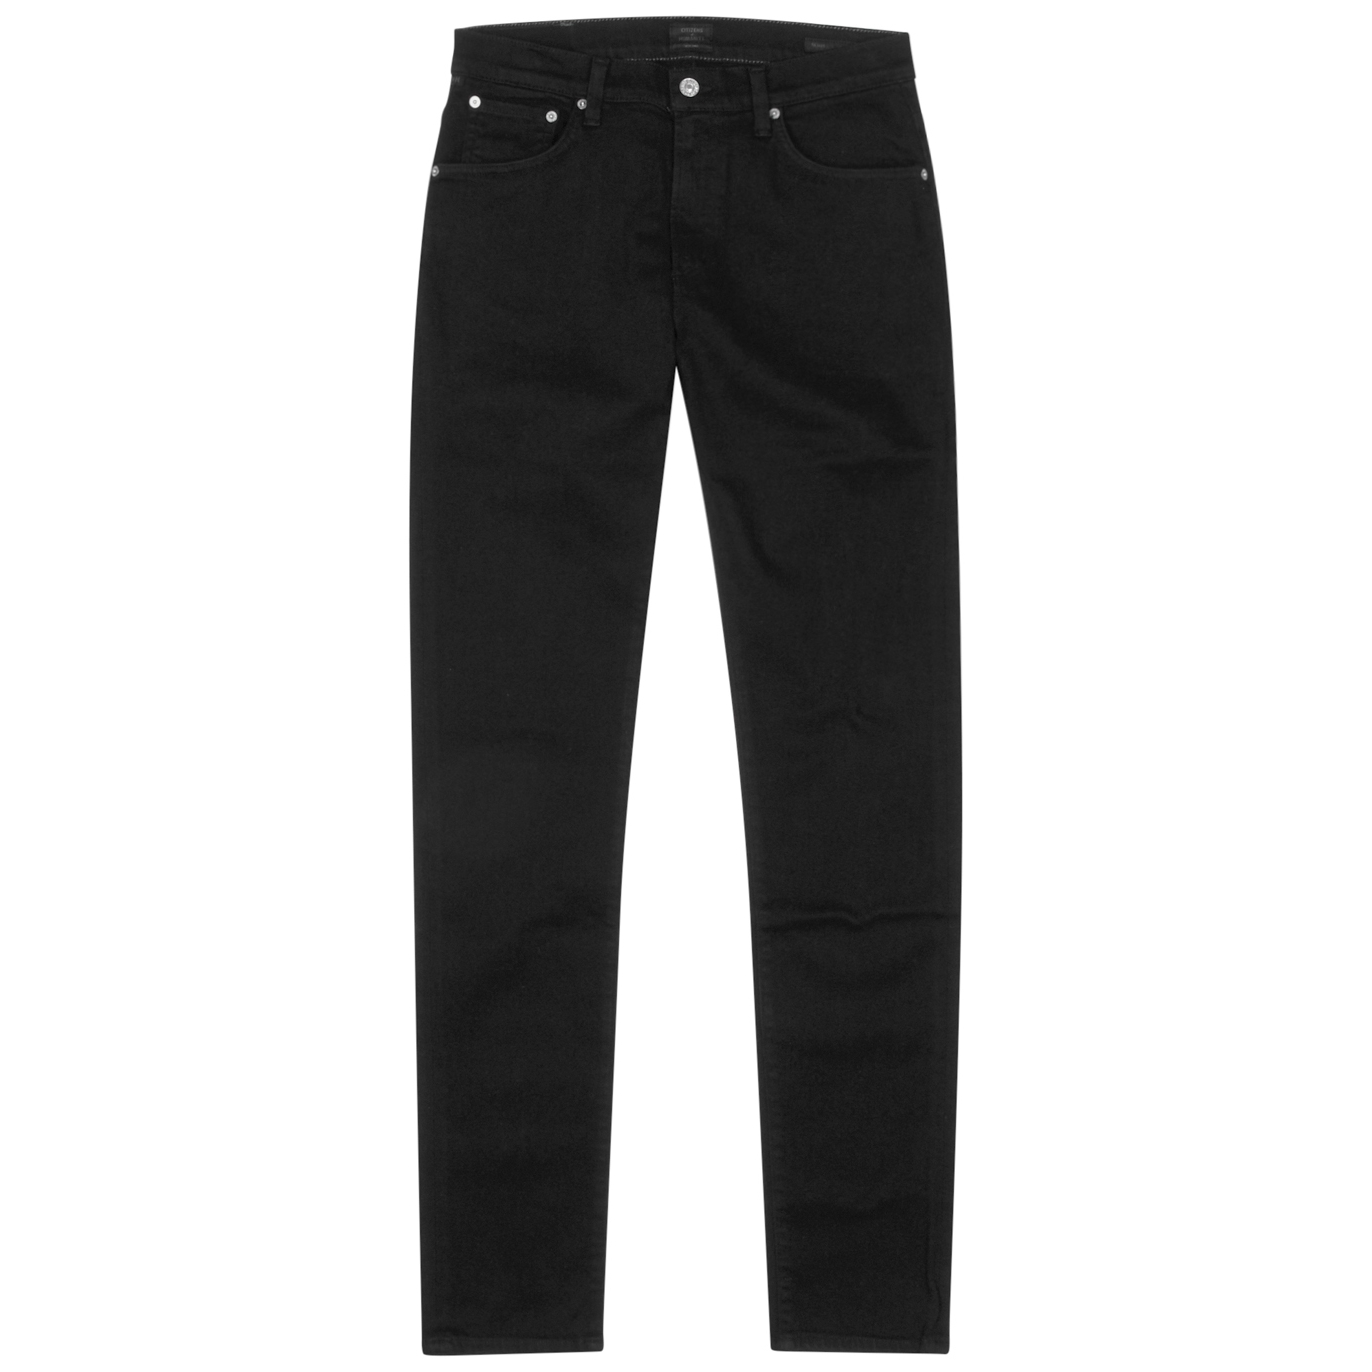 Citizens Of Humanity Noah Black Skinny Jeans - W28